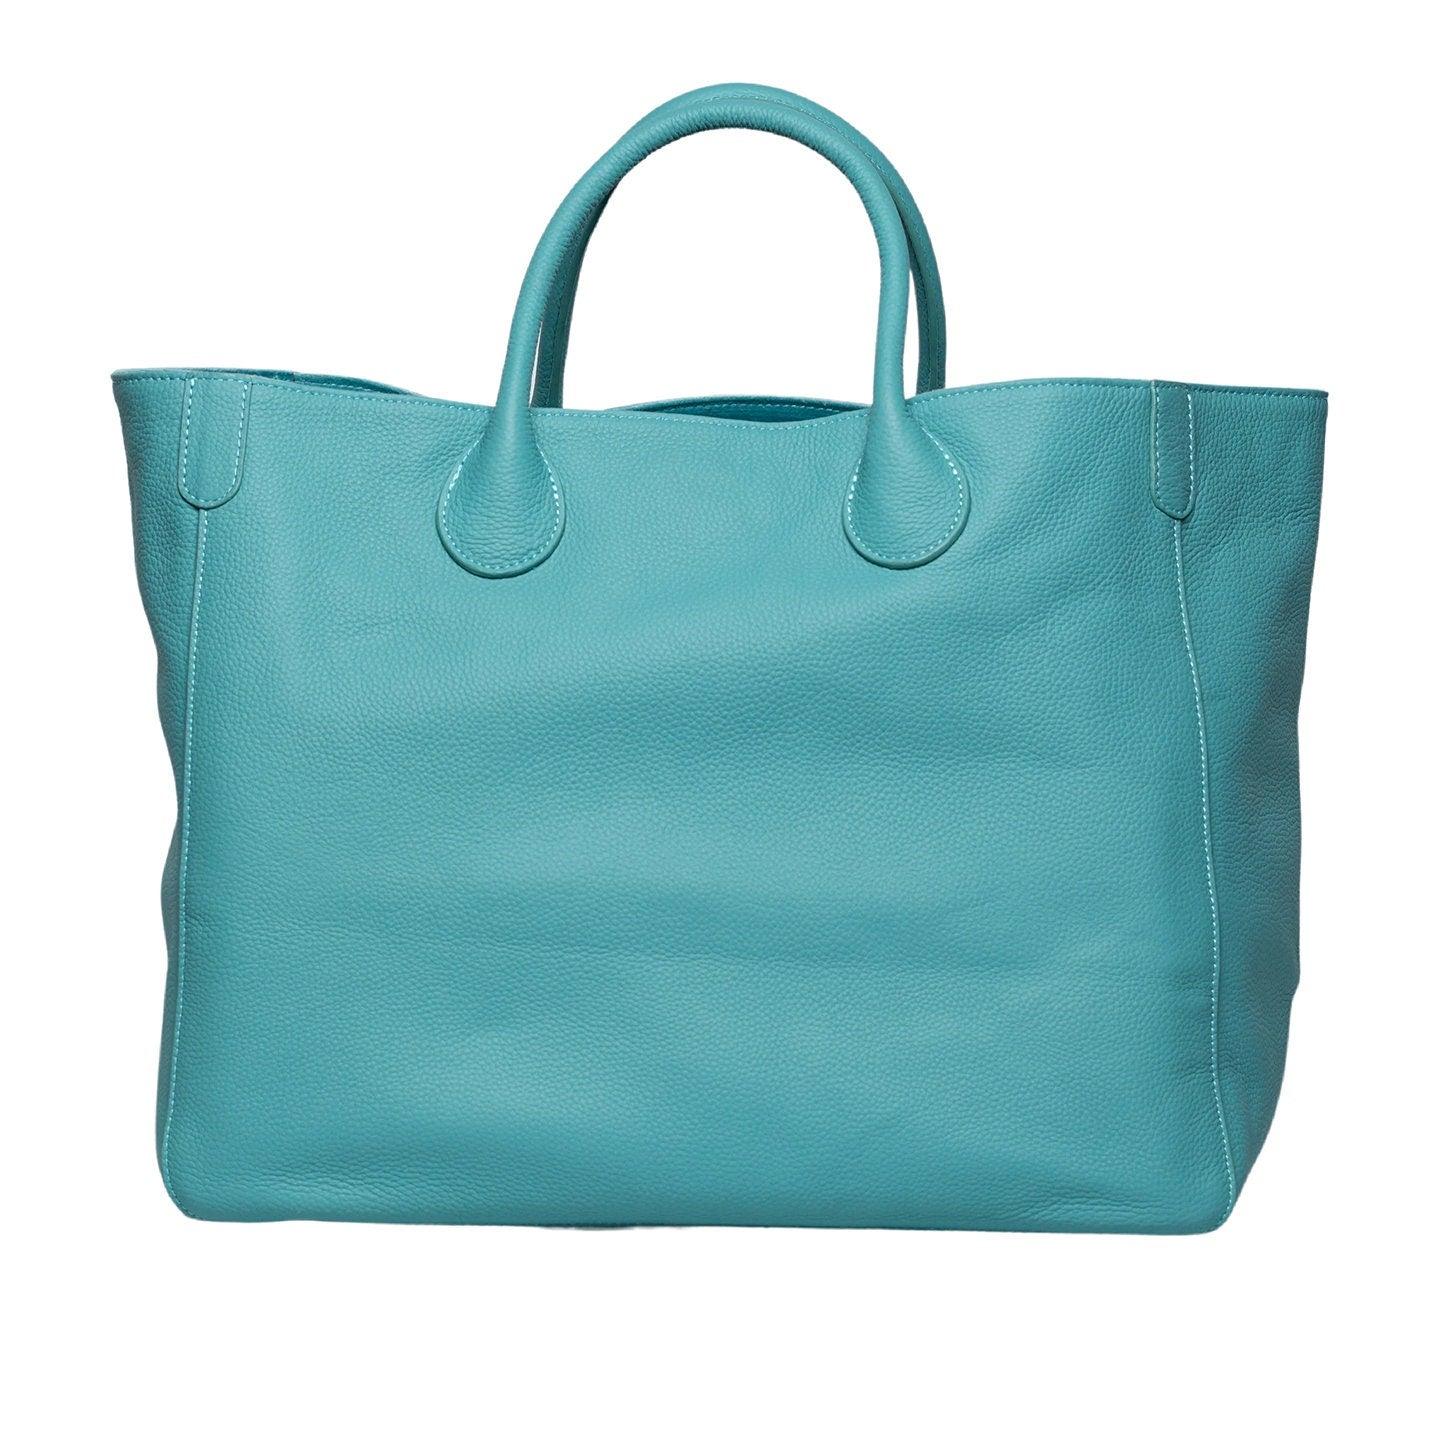 Tiffany Blue Large Leather Tote Bag, Cowhide Leather Bag, Must-have Lady Fashion Bag, Weekend Bag, Working Bag, Personalized gifts